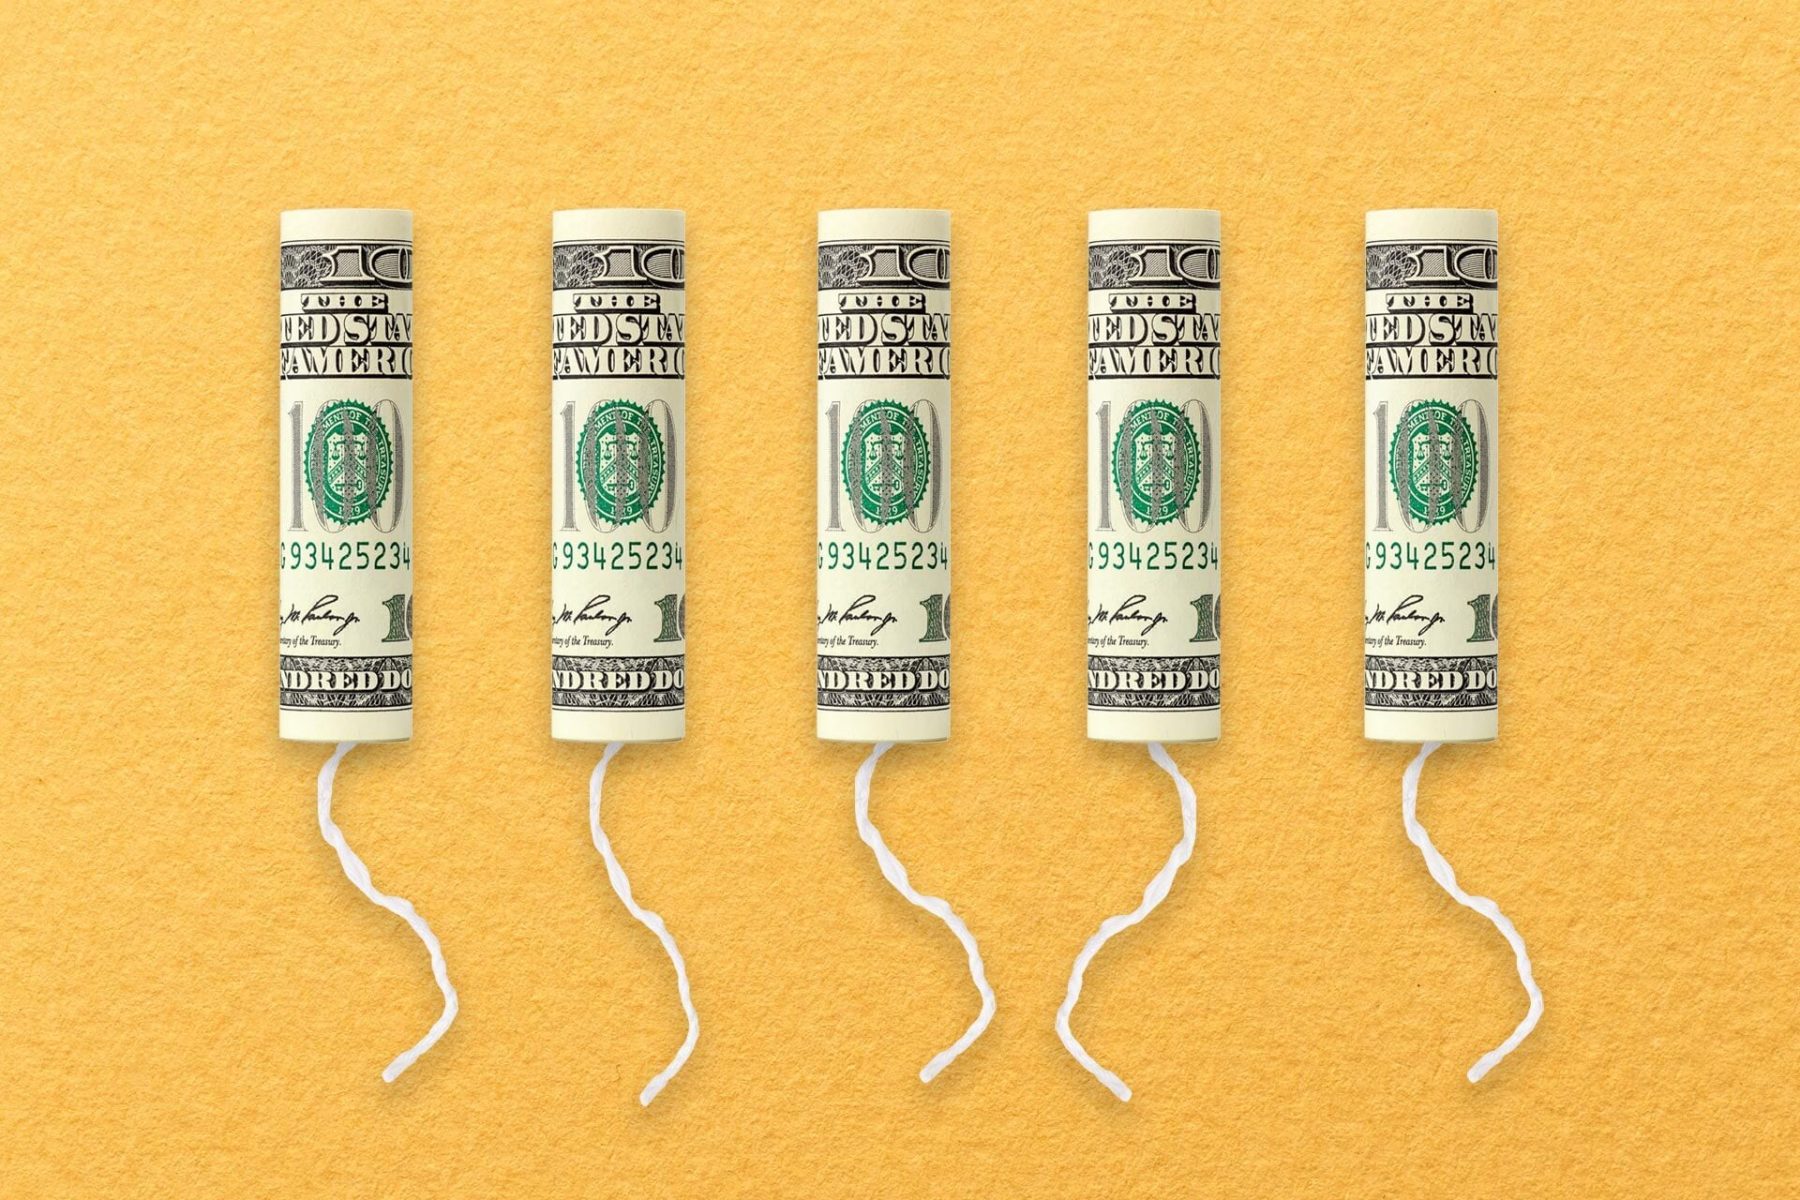 A row of tampons with $100 bills on them.